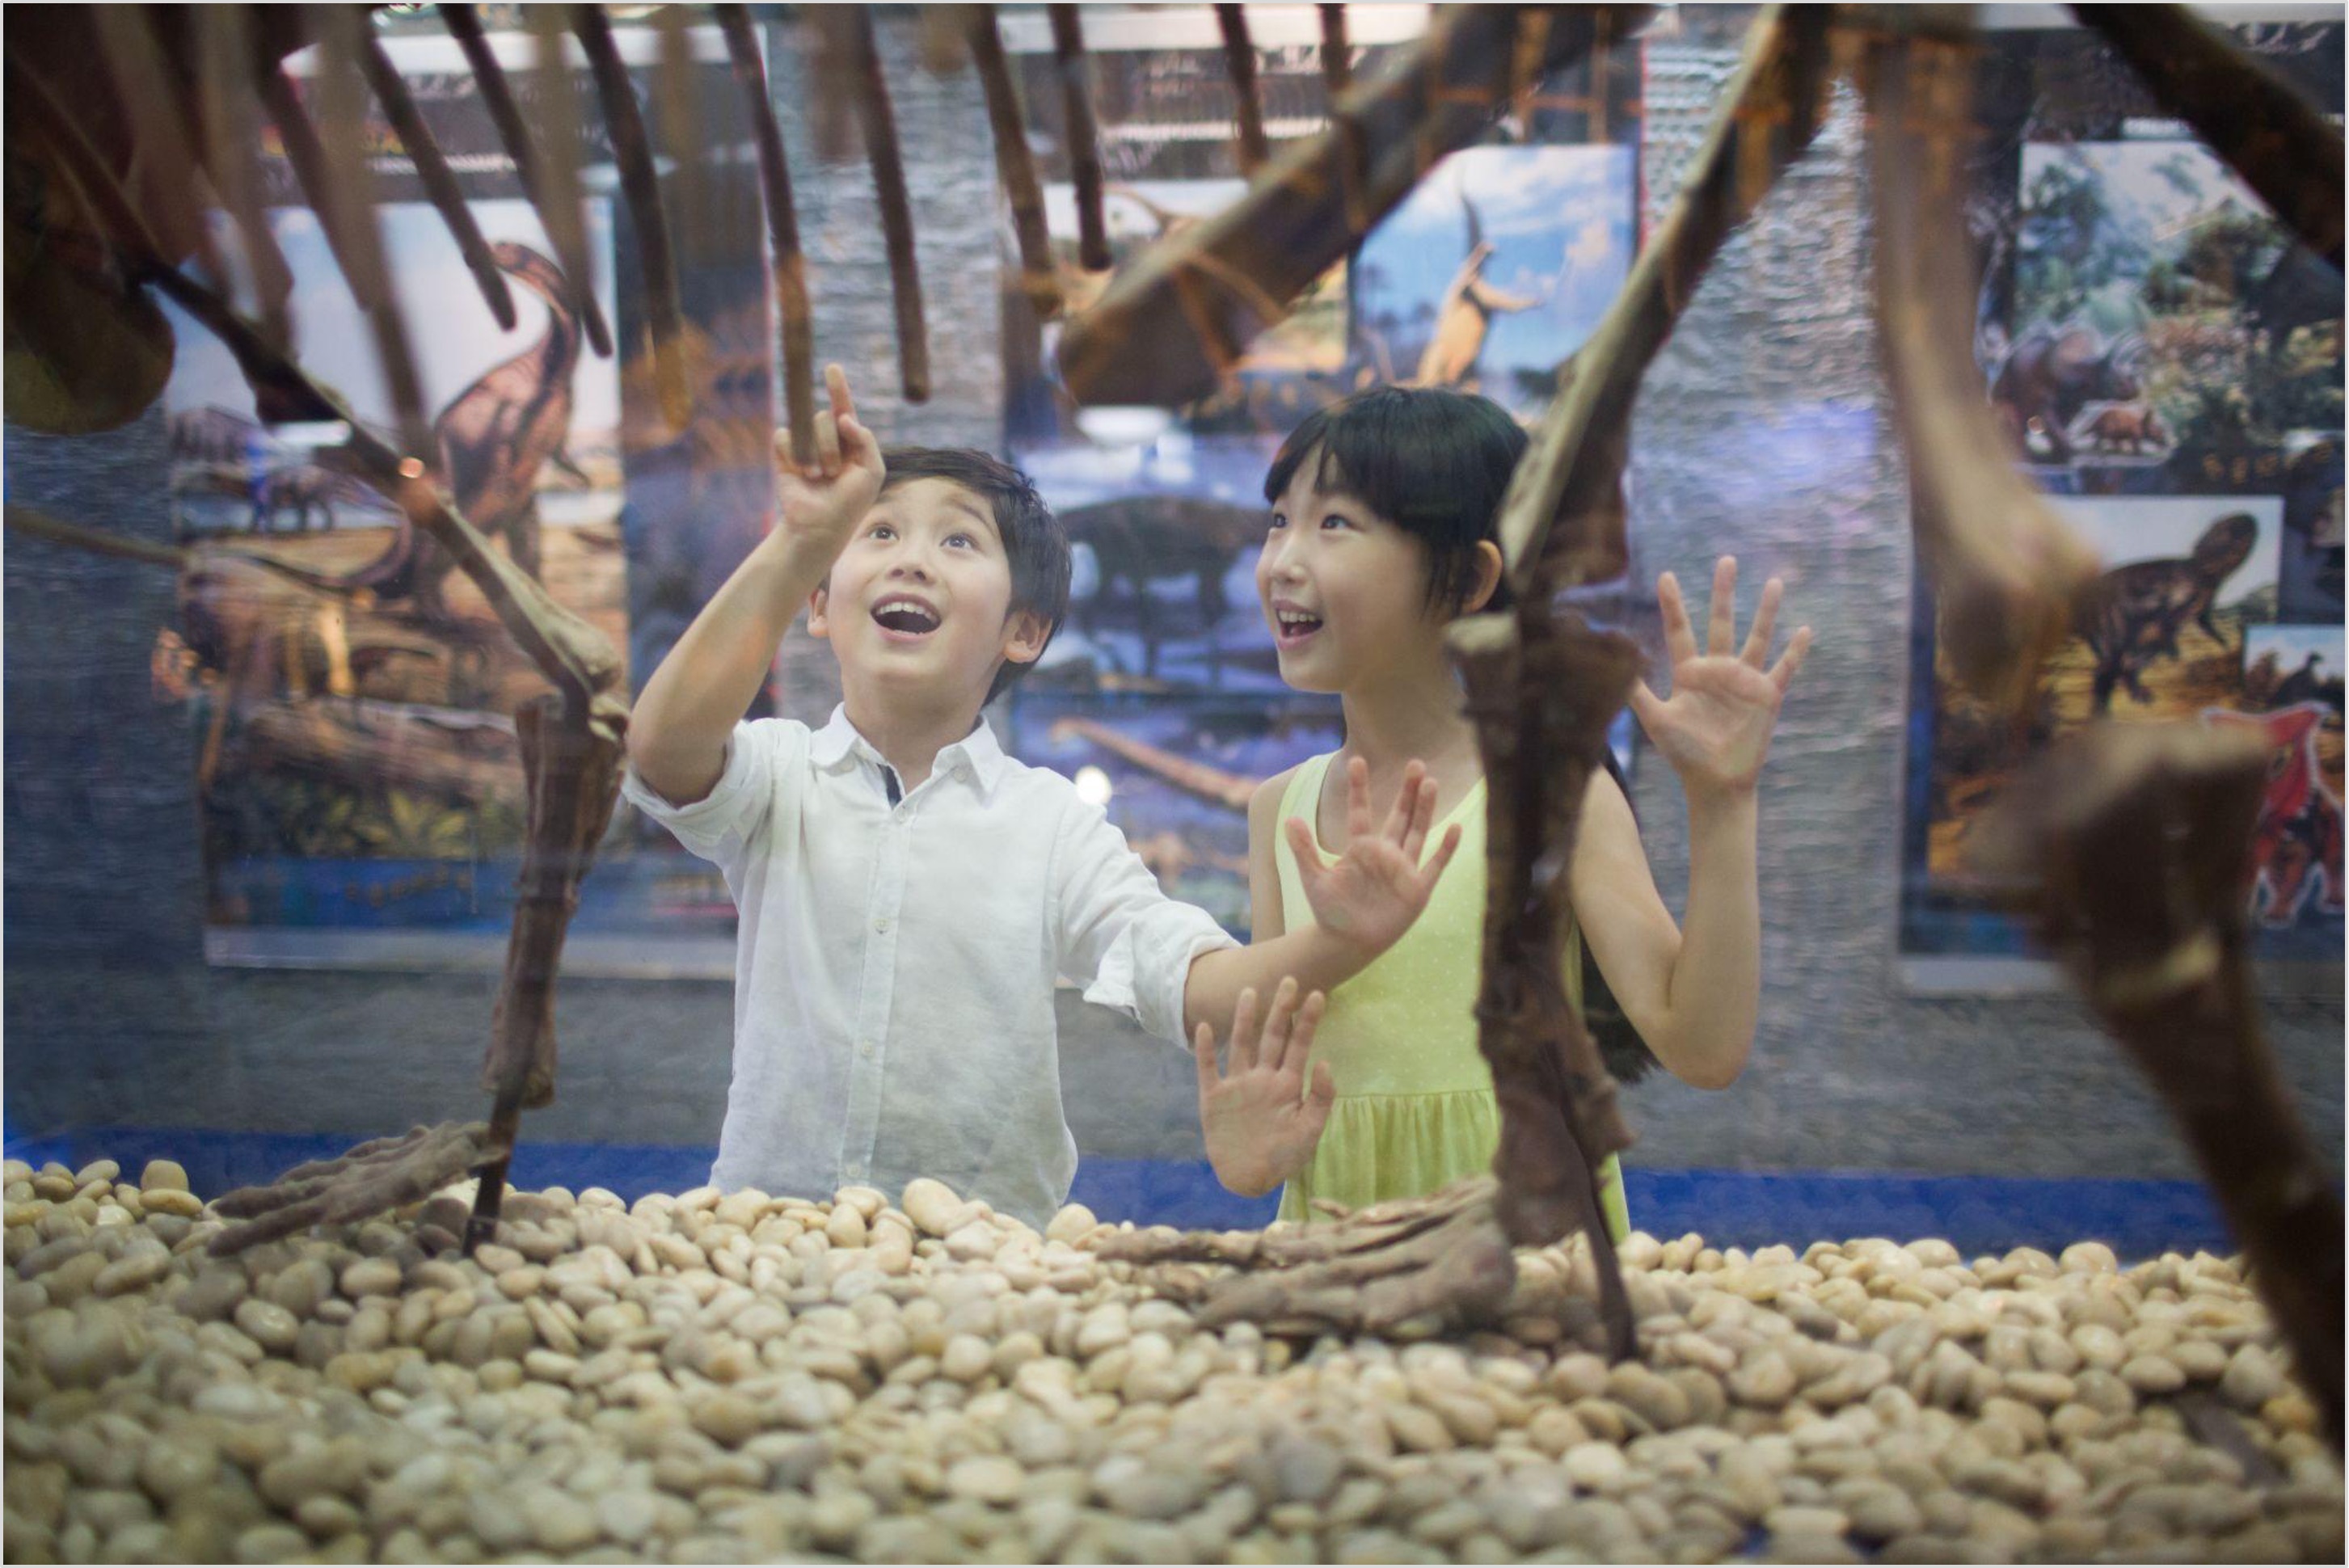 children museums singapore, places to visit during school holidays